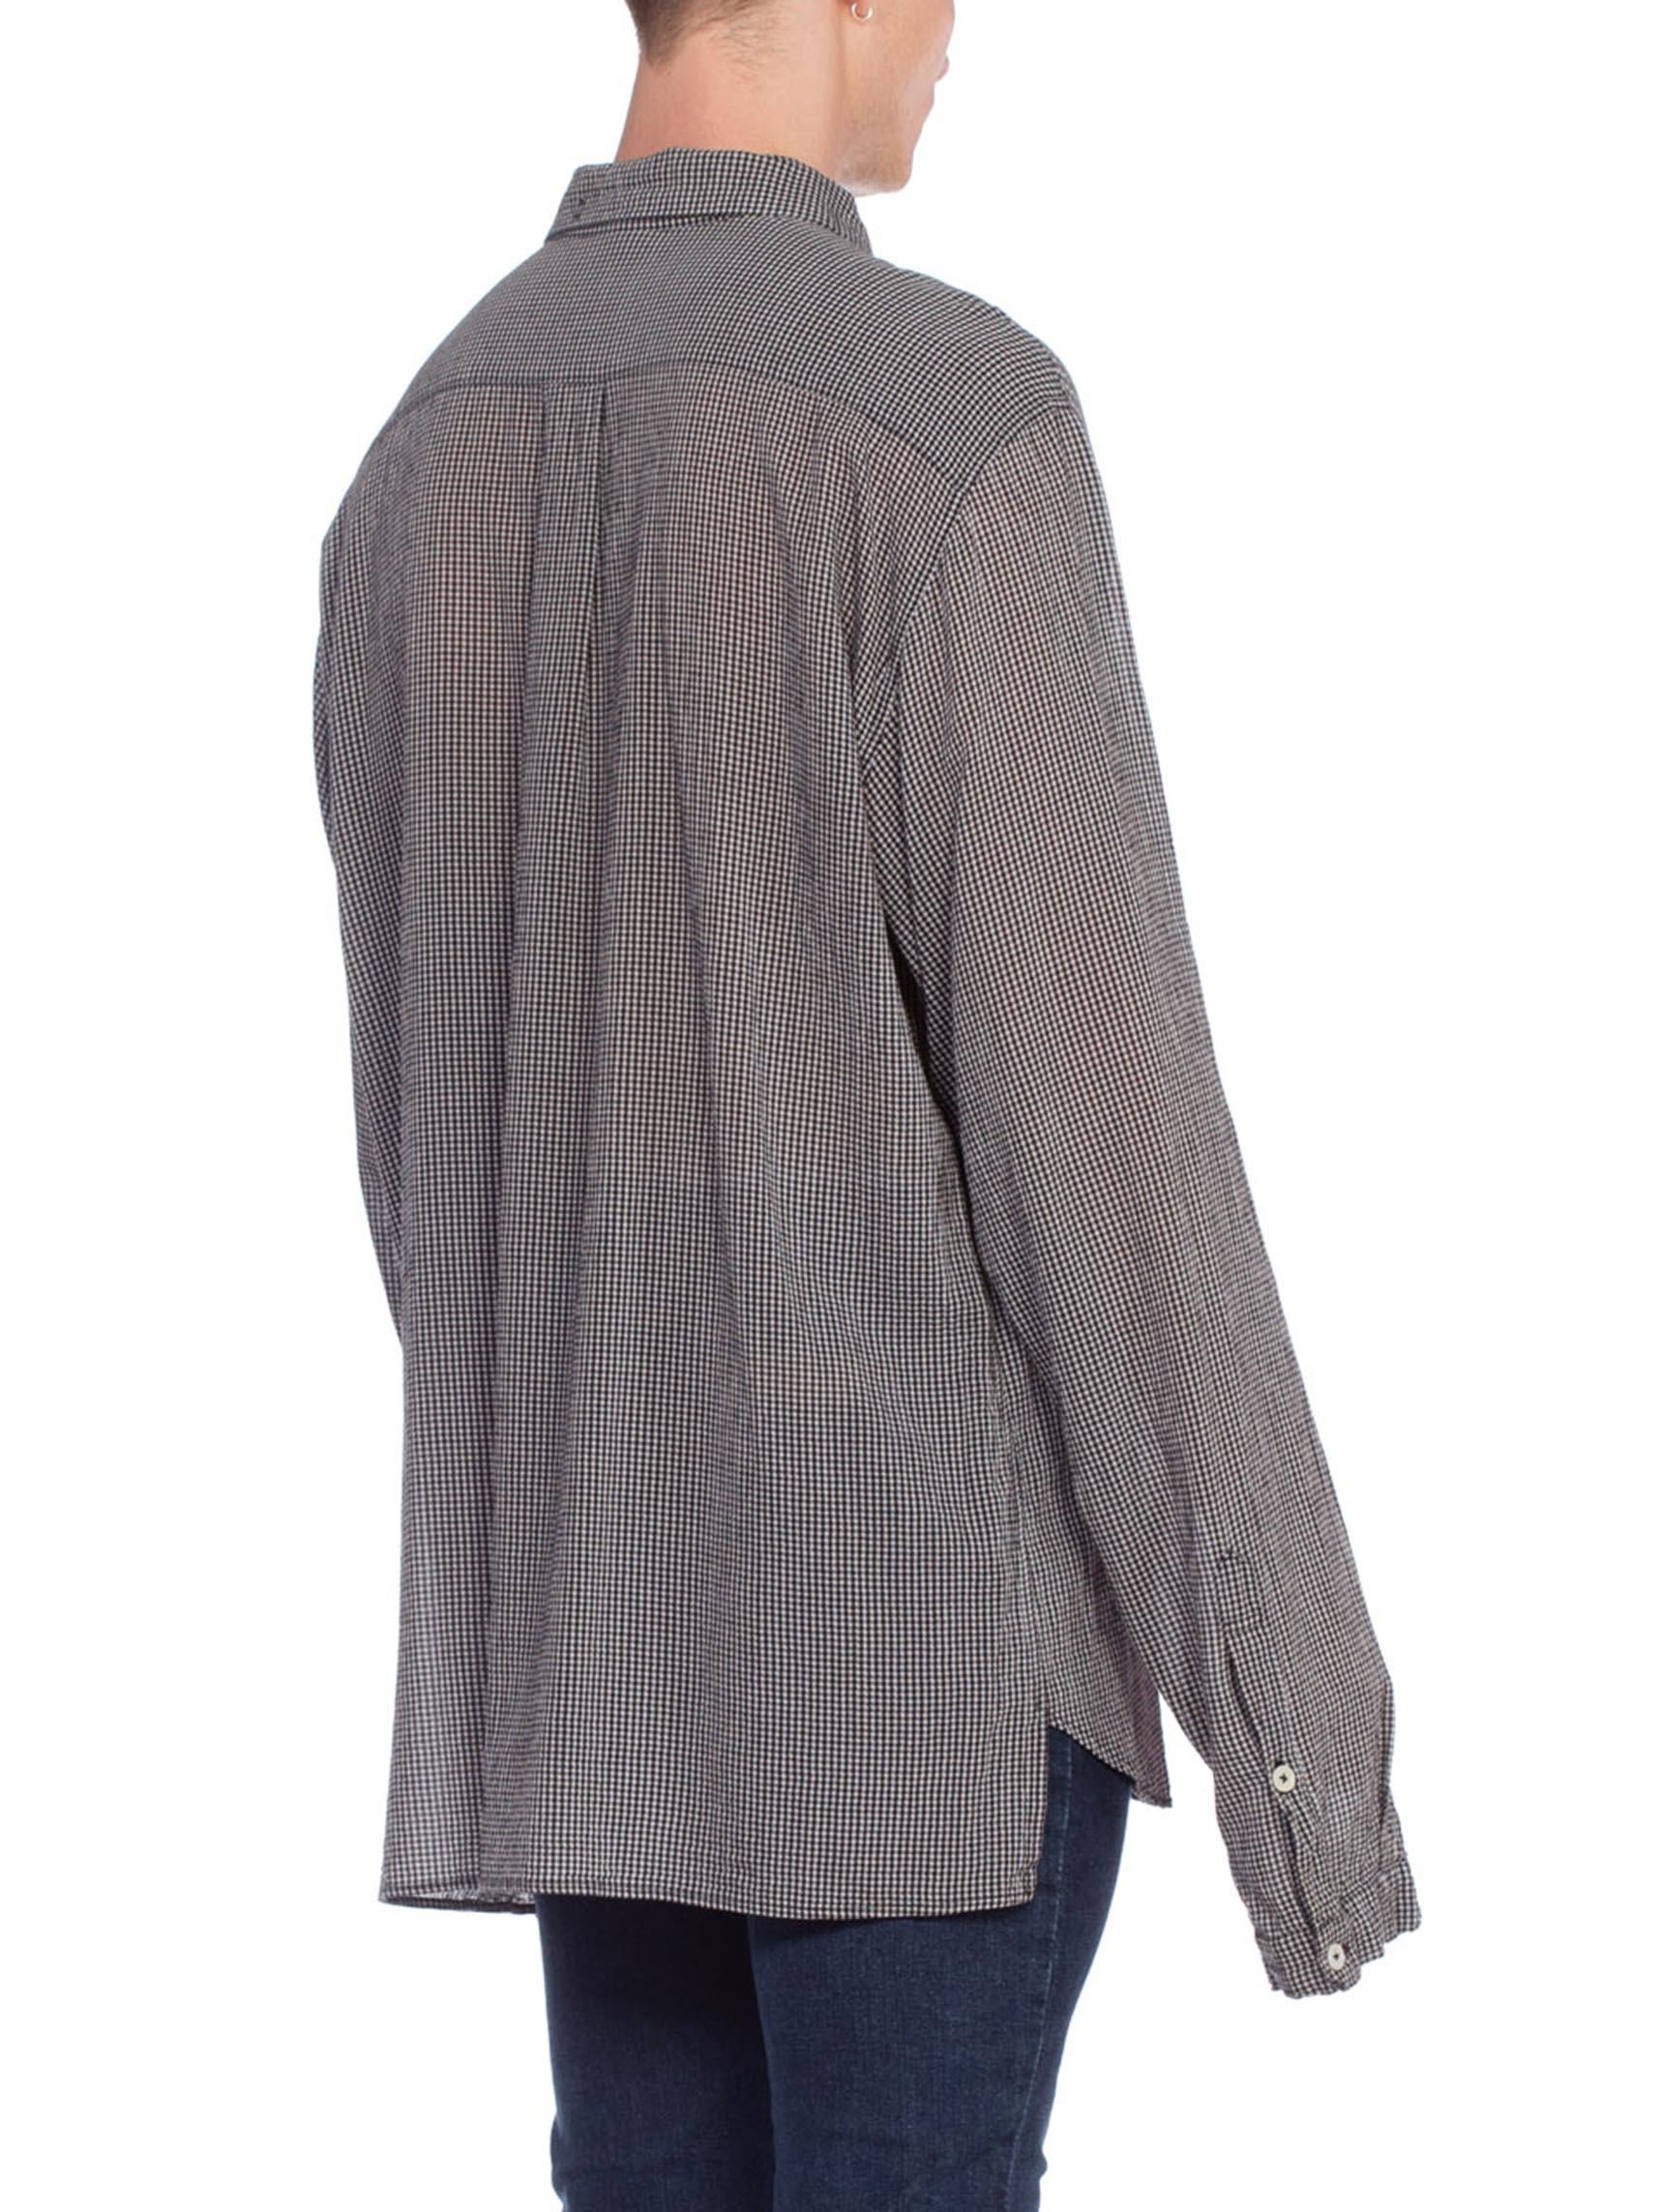 2000S ANN DEMEULEMEESTER Rayon Crepe Men's Oversized Bow Neck Shirt For Sale 4